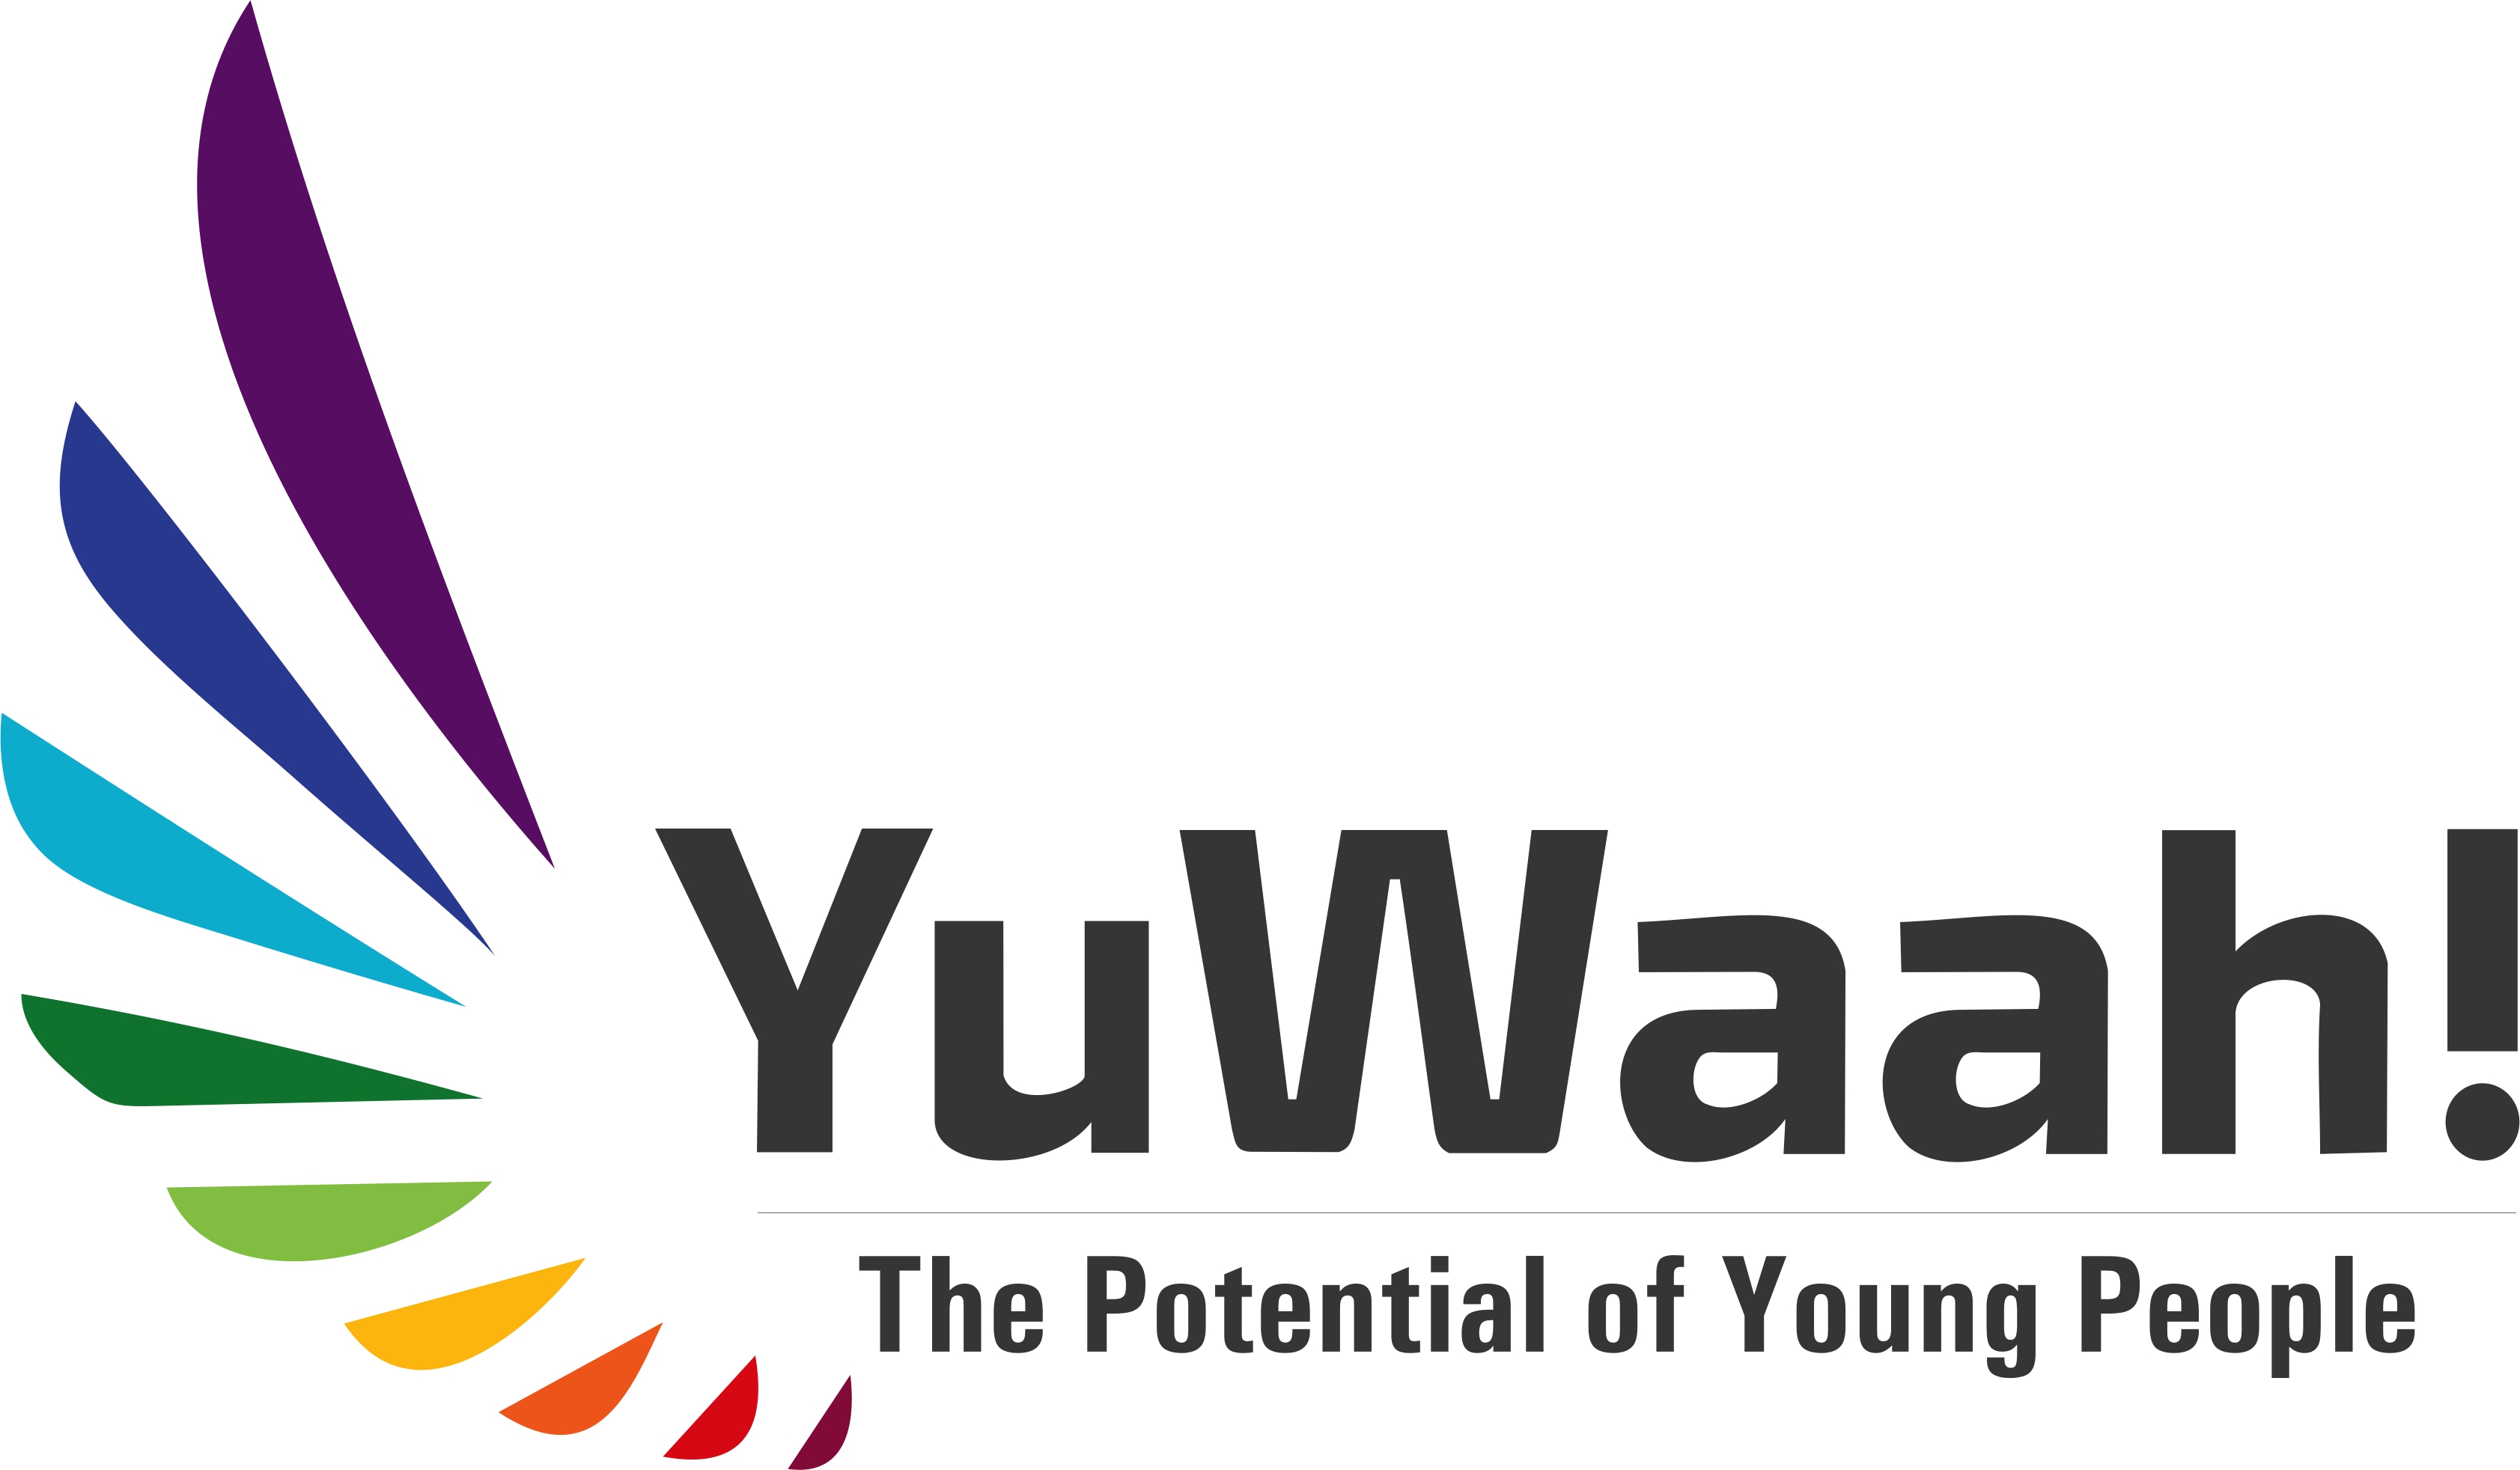 YoungWarriorNXT Introduced to mark International Youth Day 2021